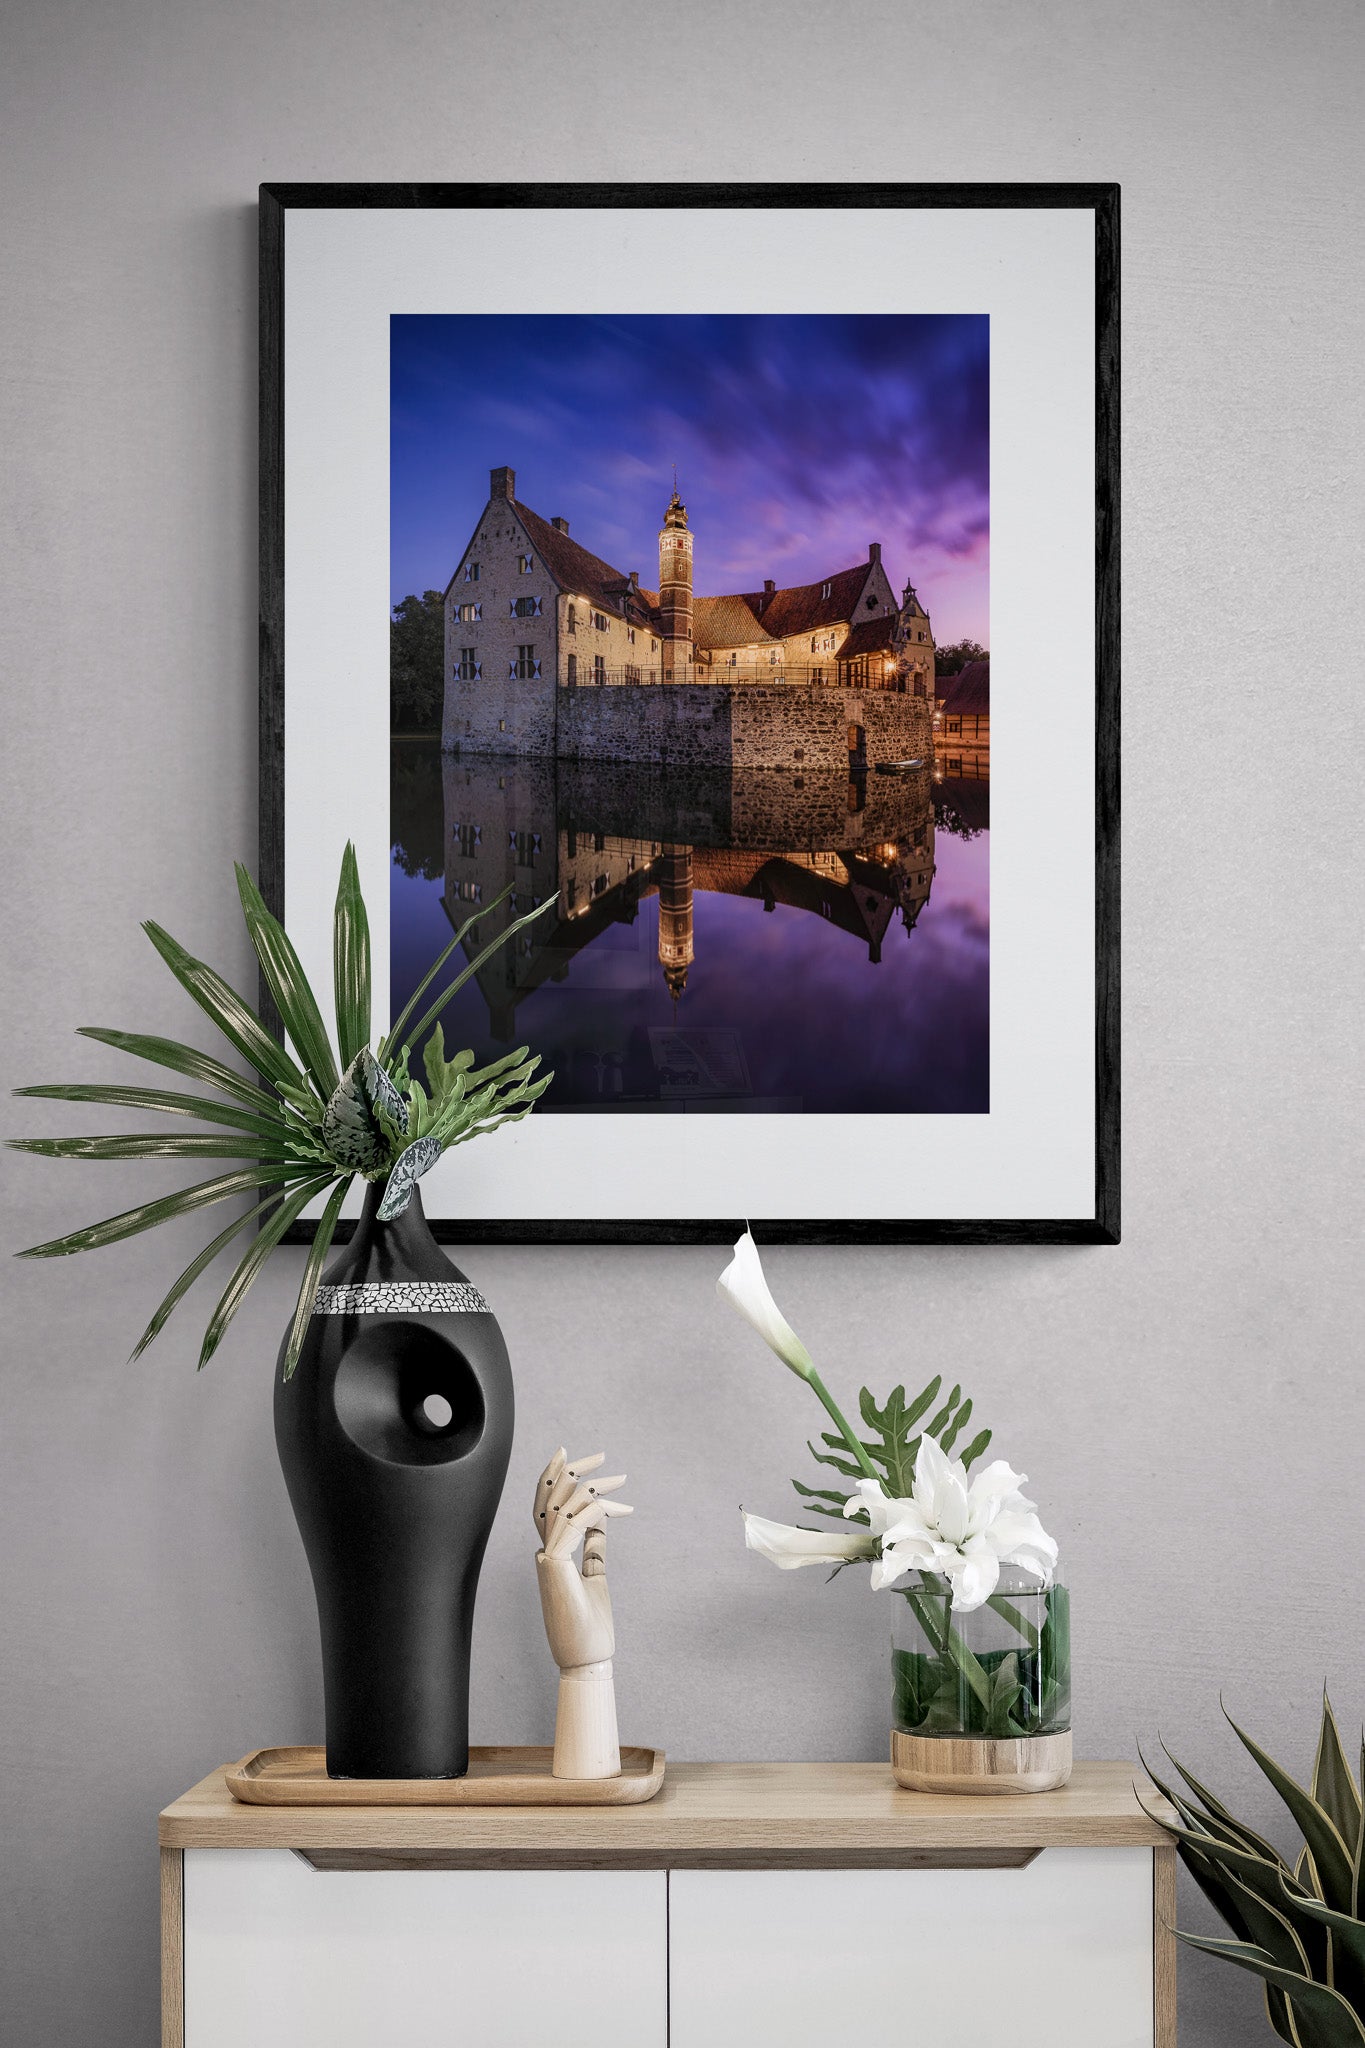 Image Title: Time flies by Photographer: Marcus Danz Location: Lüdinghausen, Germany Image description: Vischering Castle, my home town‘s medieval jewel, shines in all its beauty on this perfect summer evening shortly after sunset. High quality Fine Art print up to 36 inch / around 90 centimeters on Hahnemühle paper available. Medium variant over sideboard.